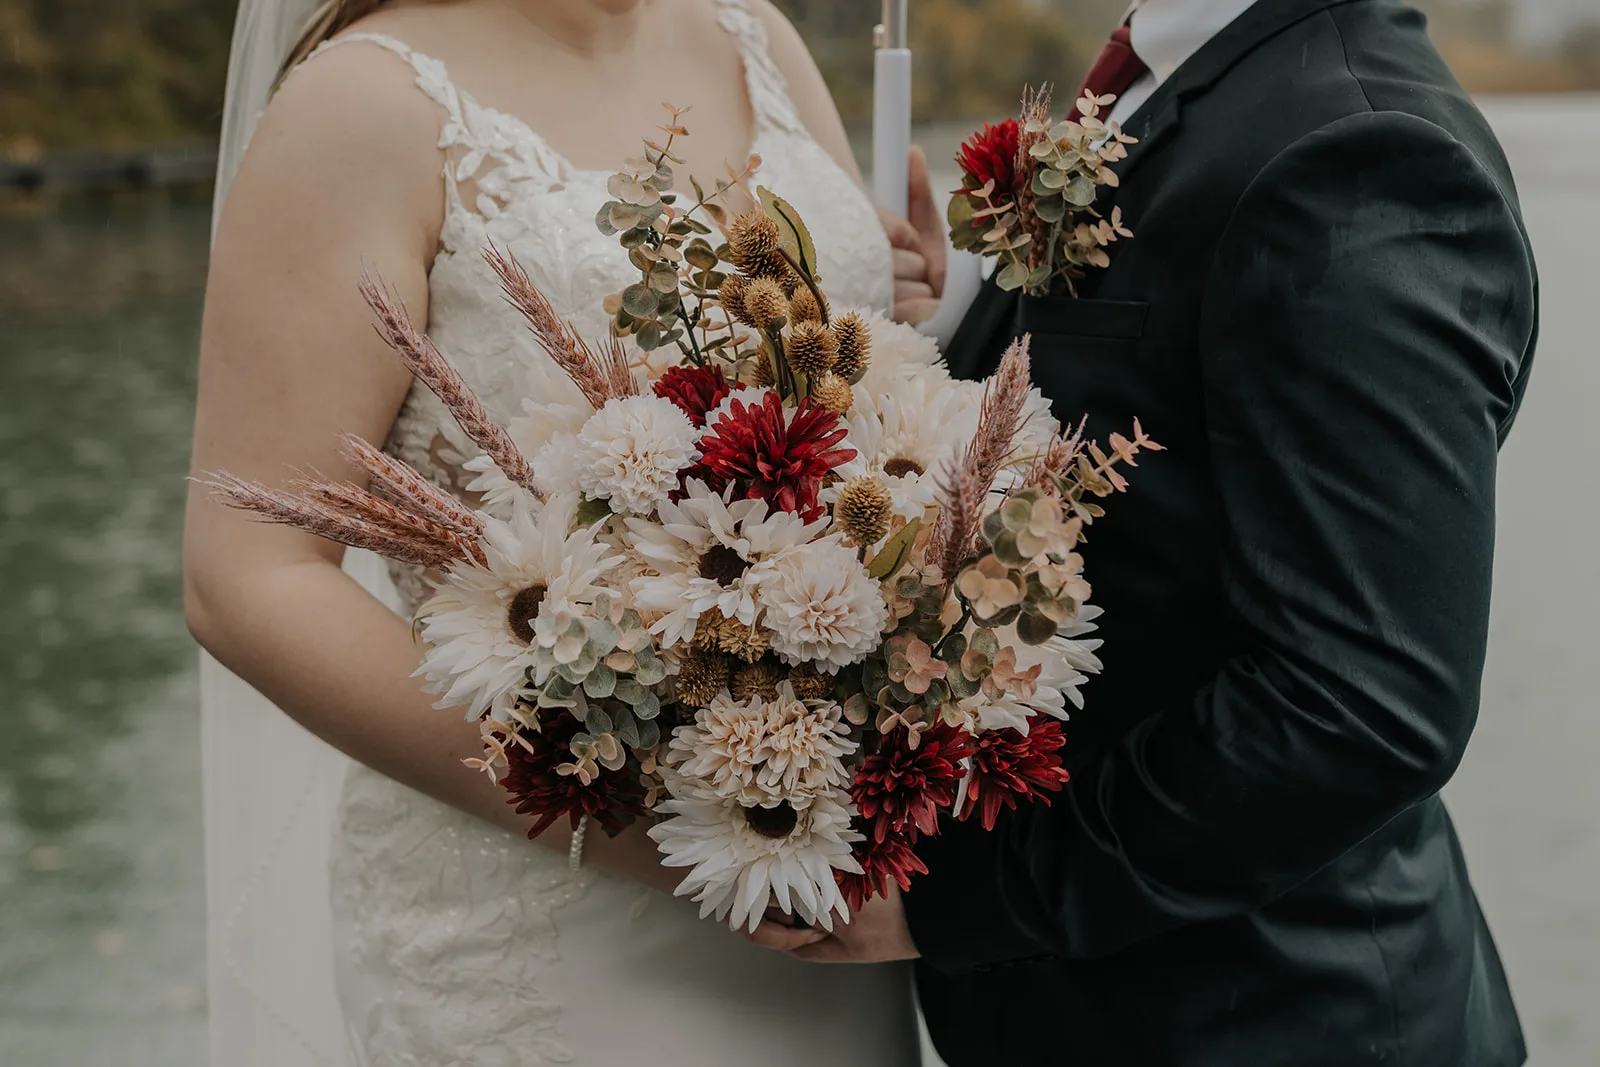 Bride and groom embracing and holding a bouquet of flowers